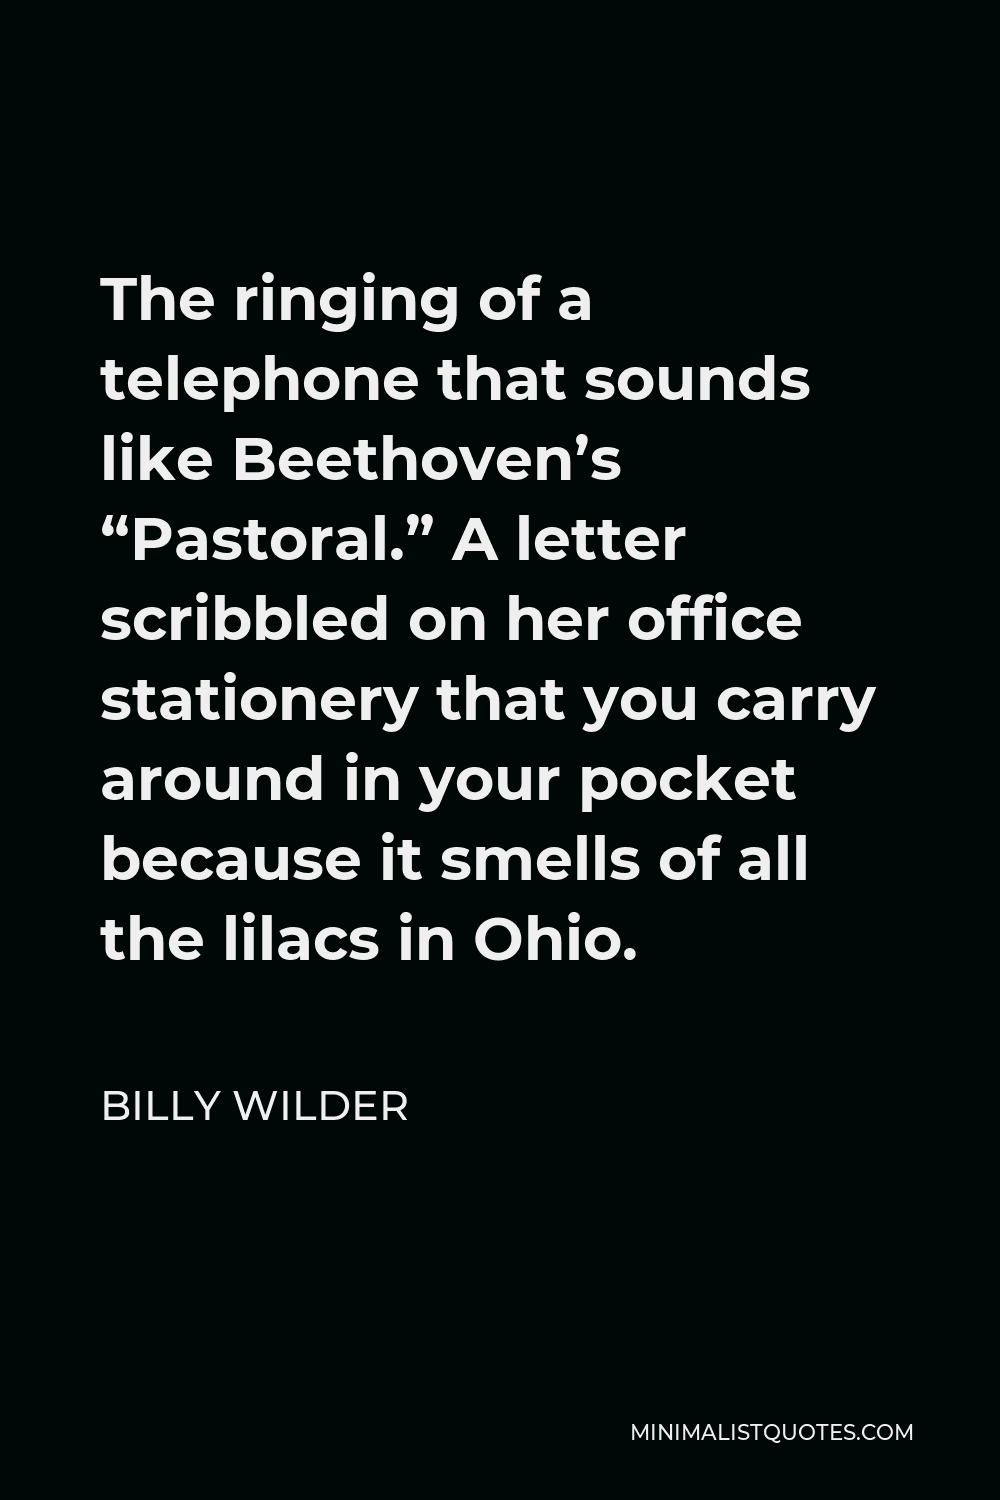 Billy Wilder Quote - The ringing of a telephone that sounds like Beethoven’s “Pastoral.” A letter scribbled on her office stationery that you carry around in your pocket because it smells of all the lilacs in Ohio.